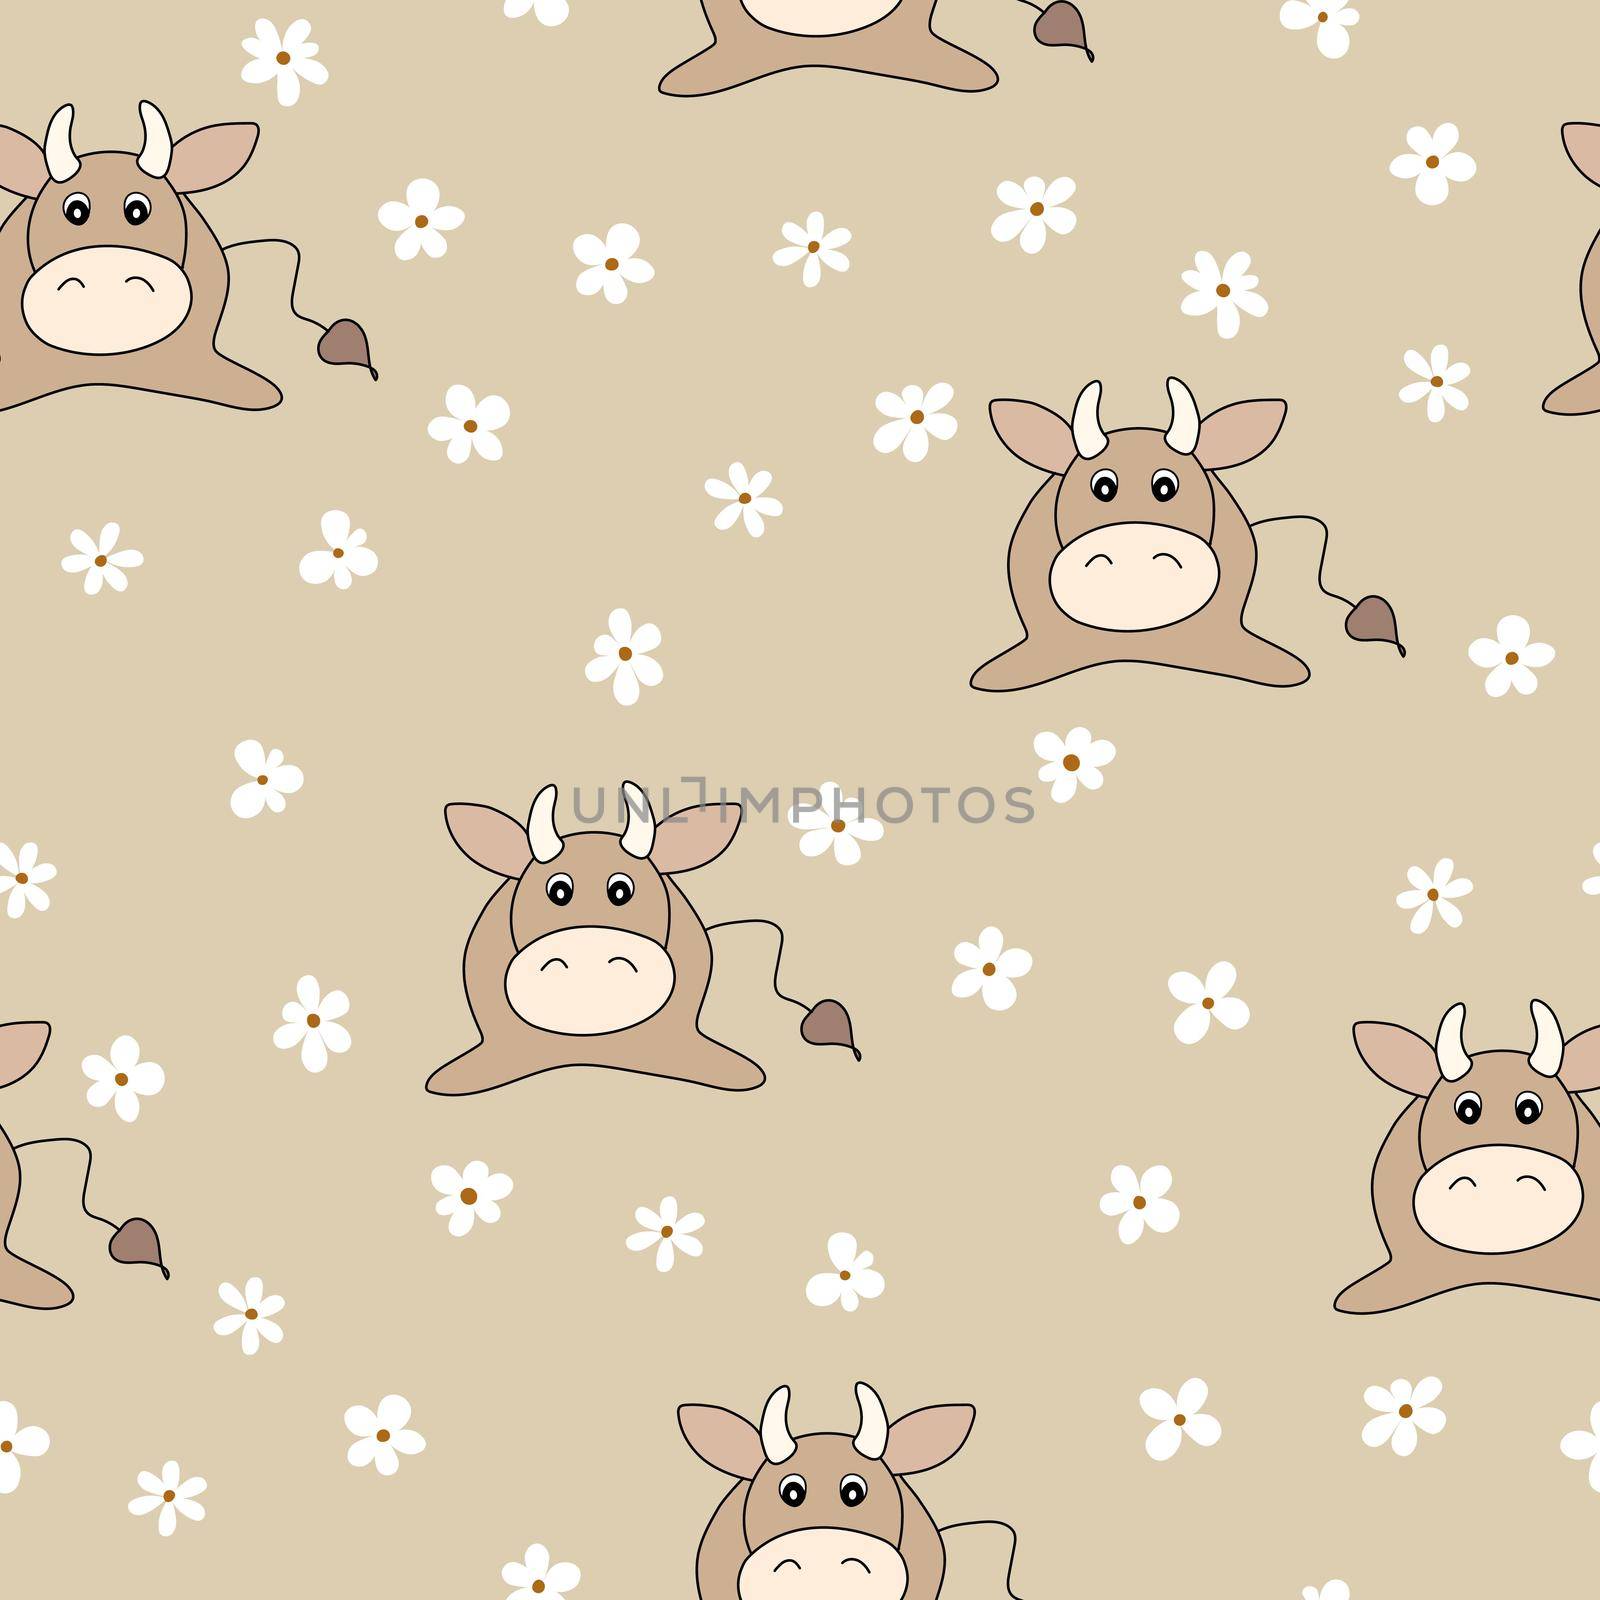 Vector flat animals colorful illustration for kids. Seamless pattern with cute bull and flowers on beige background. Cartoon adorable character. Design for textures, card, poster, fabric, textile.